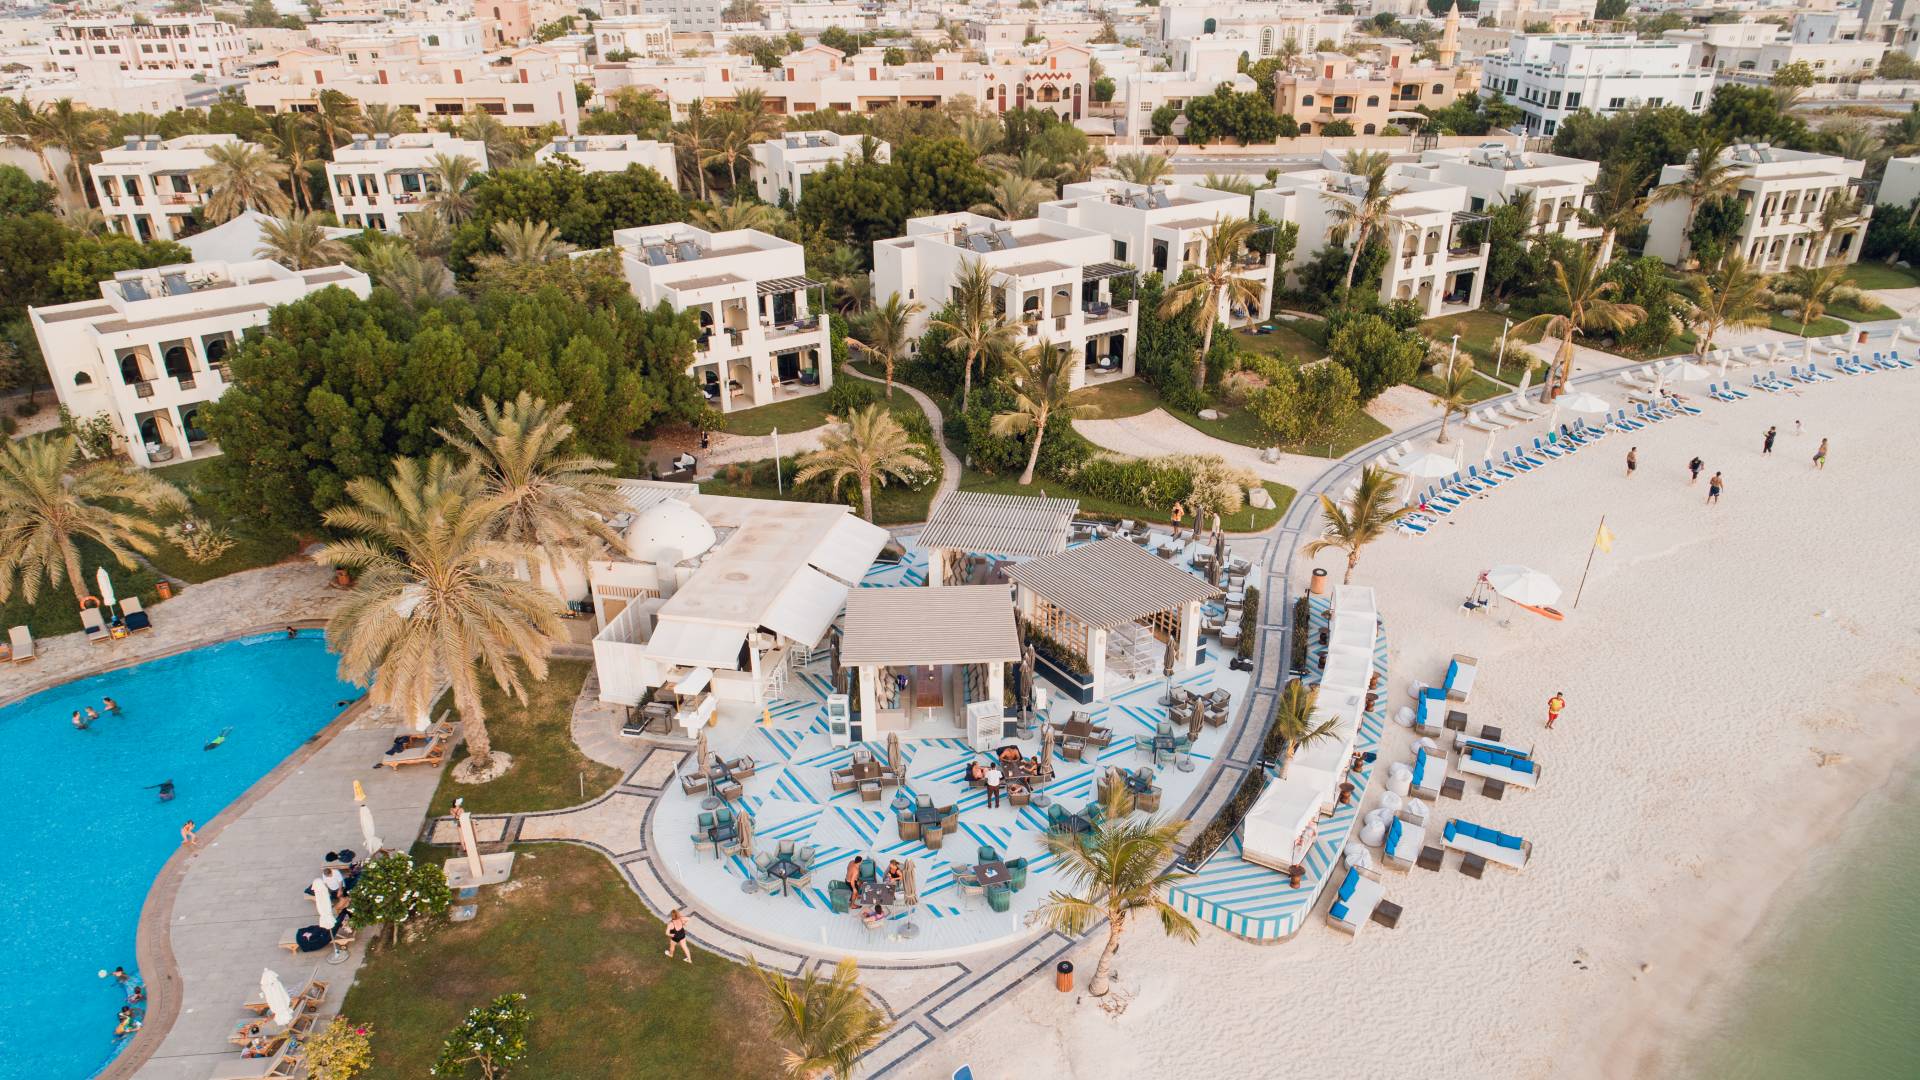 Overhead view of hotel